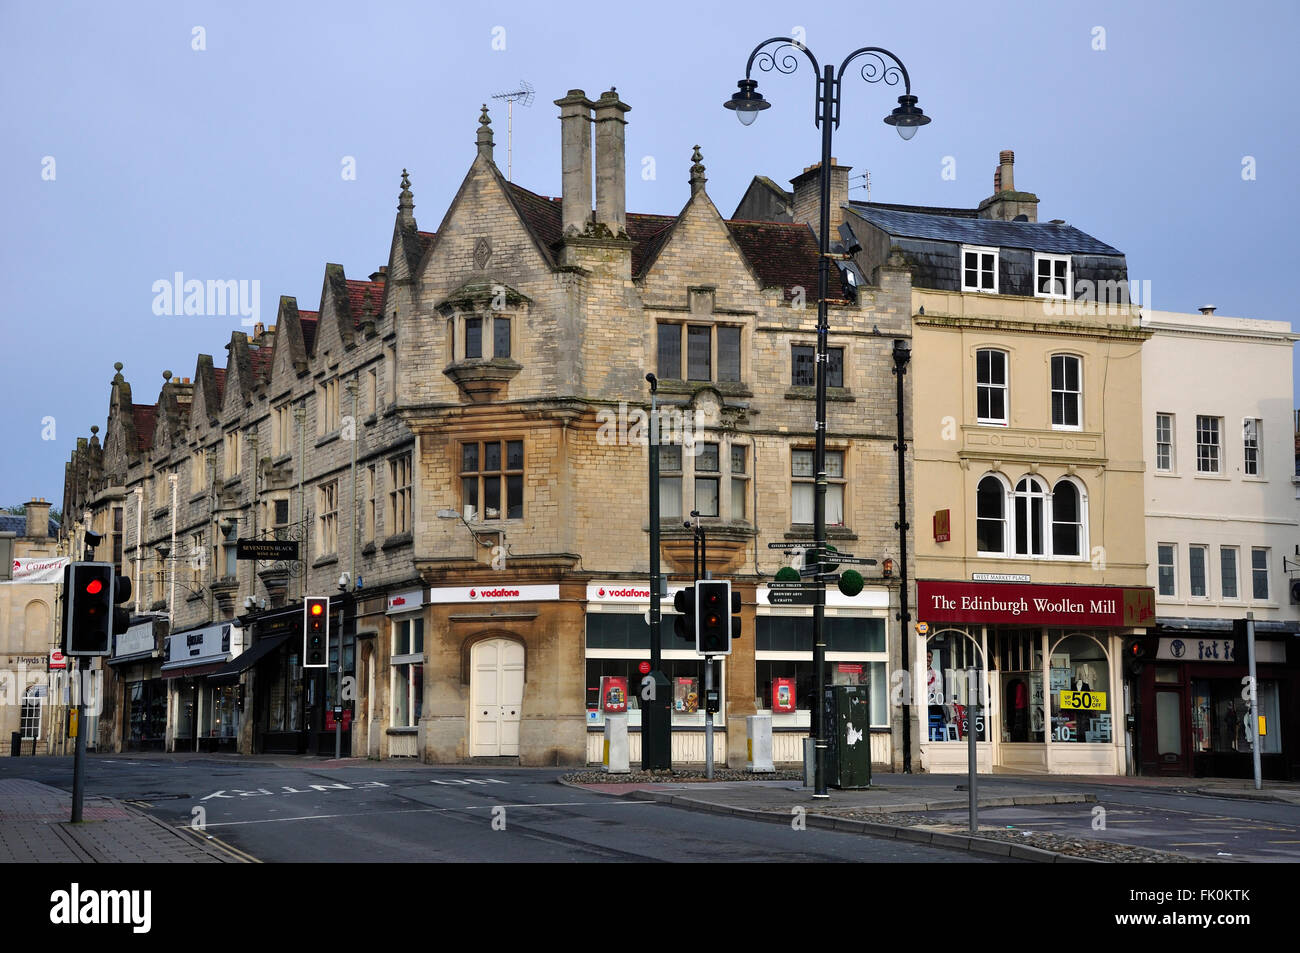 High Street in Cotswold città di Cirencester, Wiltshire, Inghilterra Foto Stock